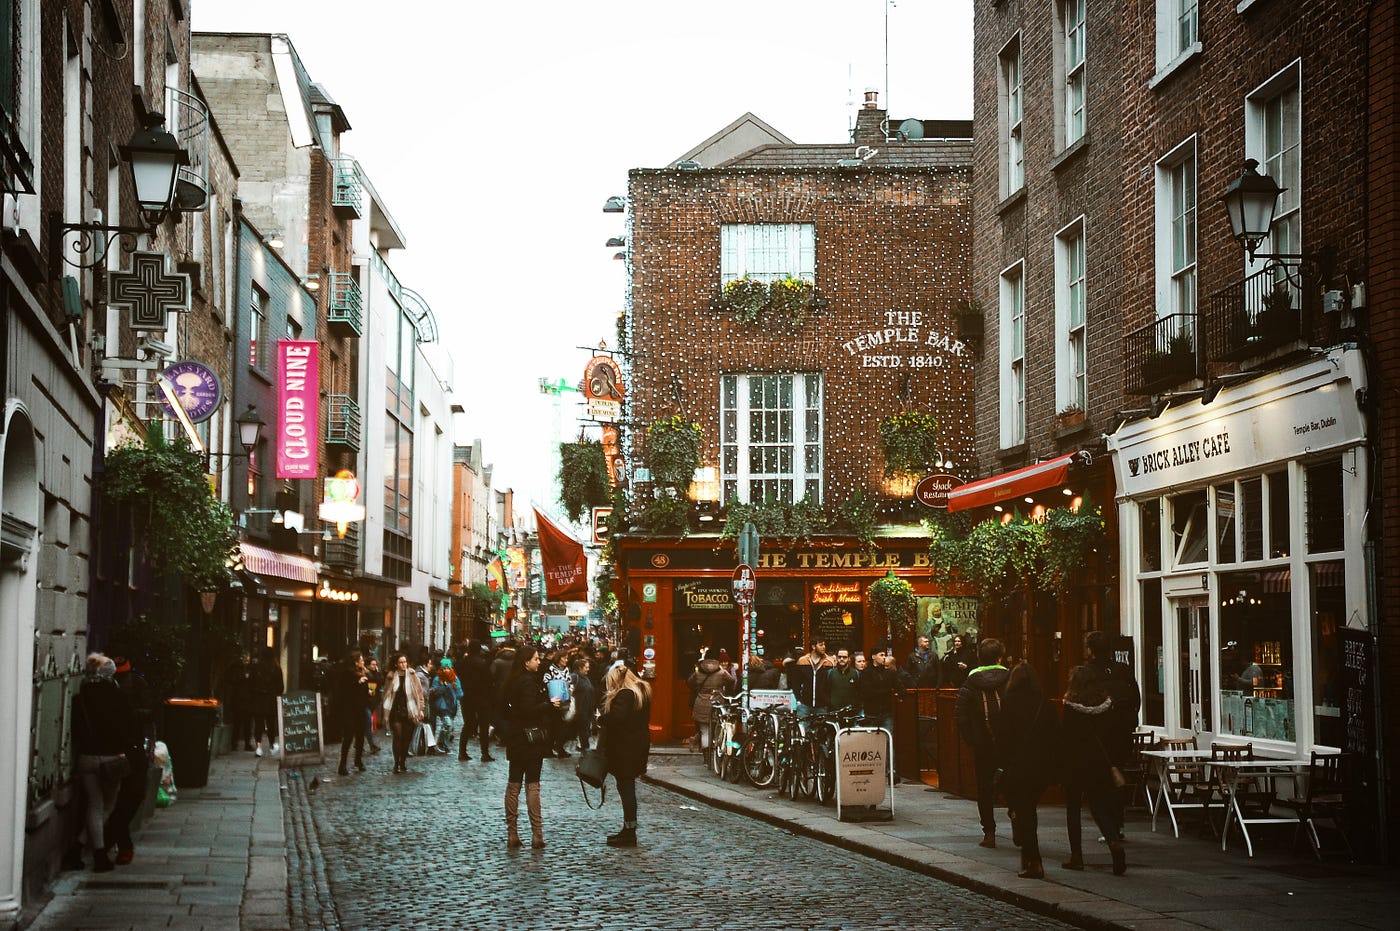 13 Truths About Living in Ireland by Emer Ryan Medium